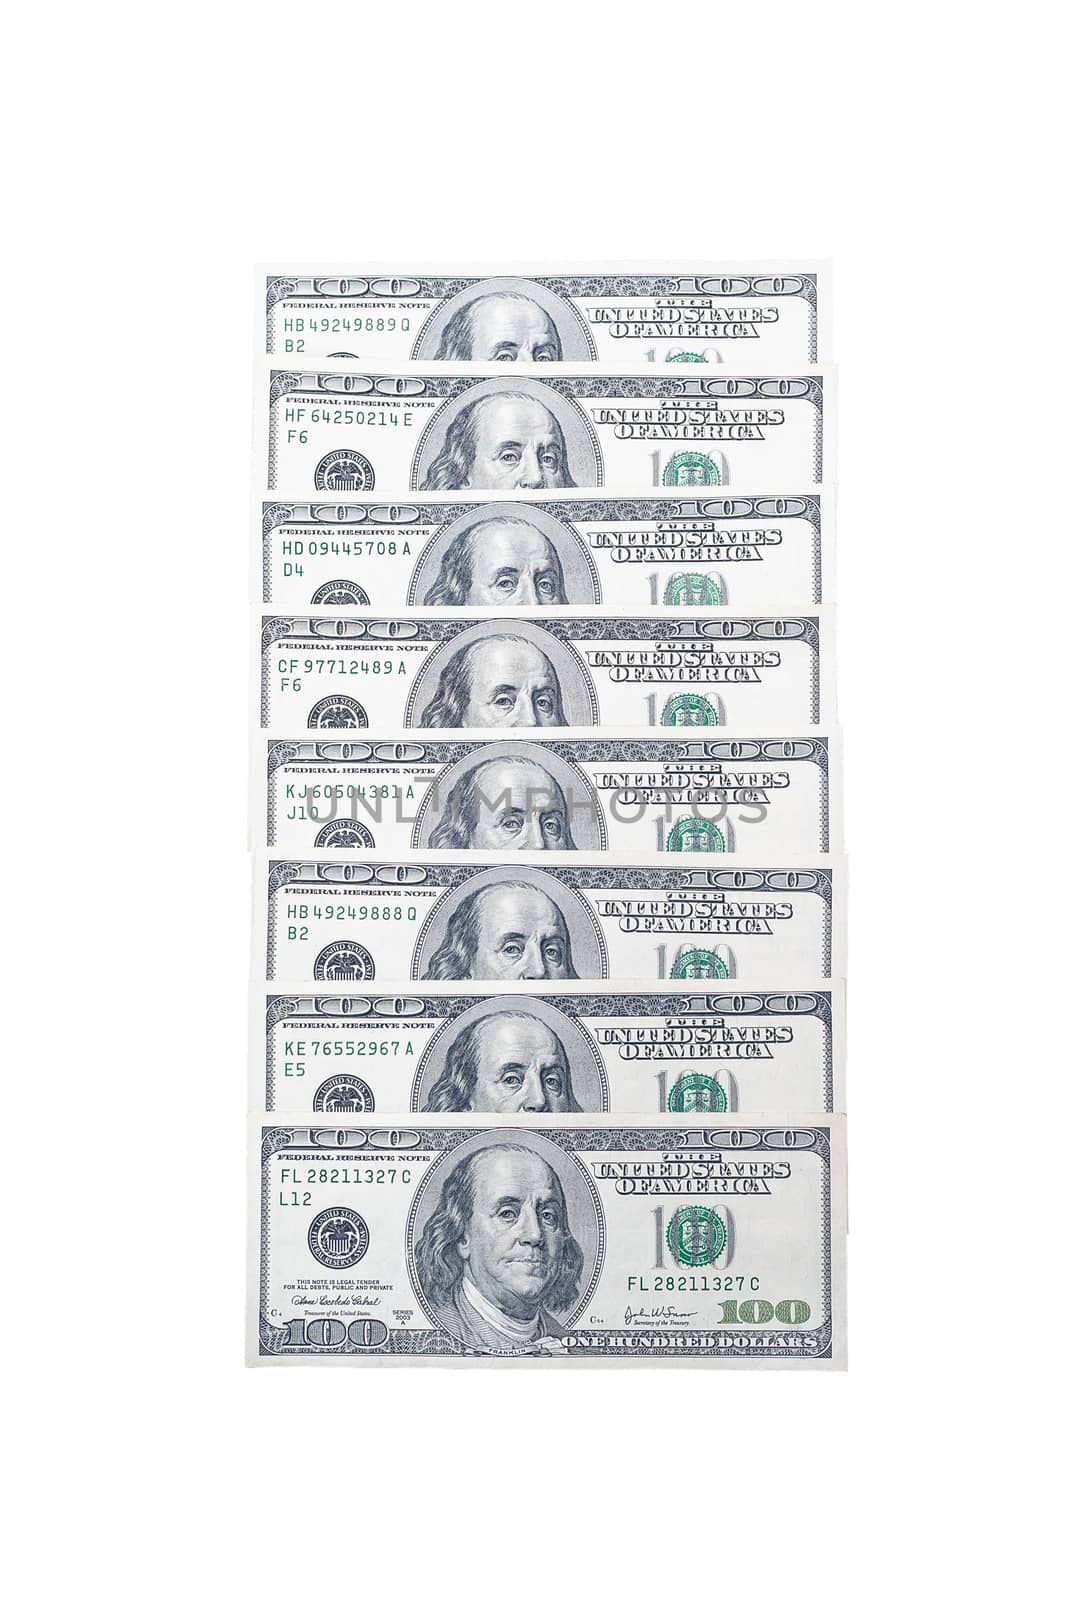 US dollar bills folded into a column with a portrait of American President Benjamin Franklin on an isolated white background